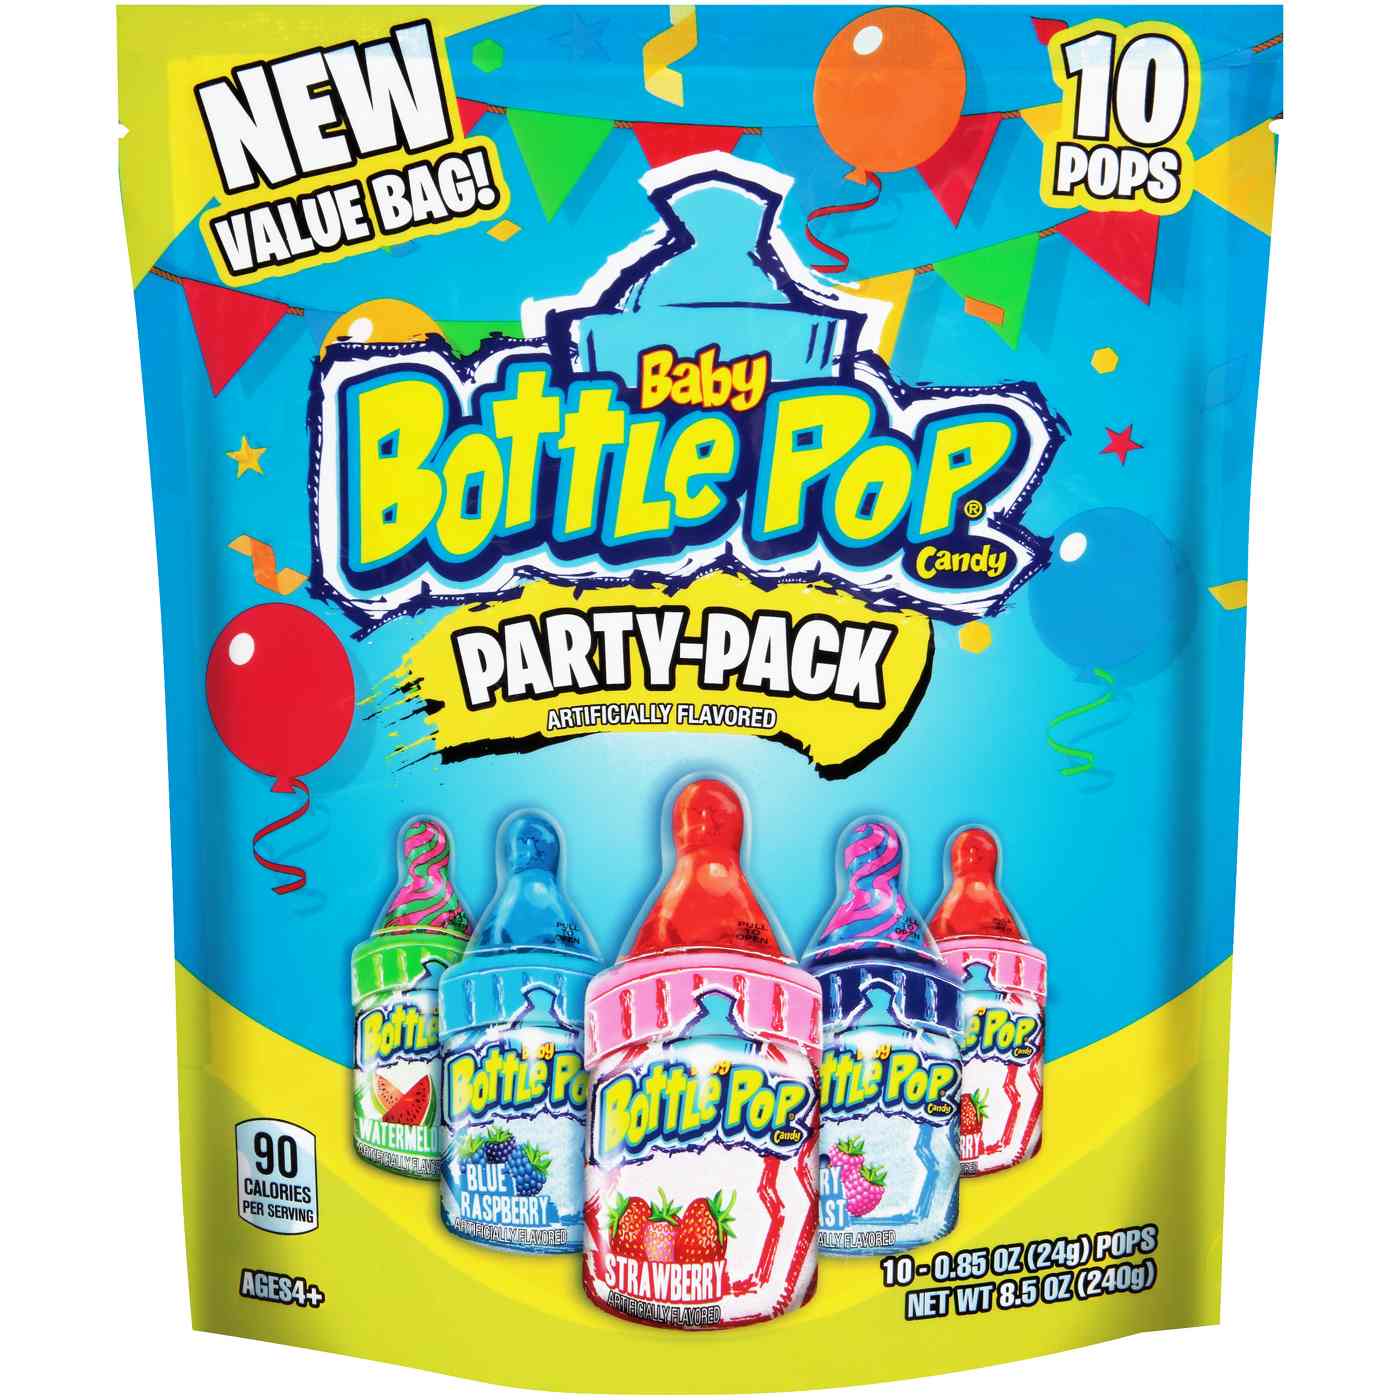 Baby Bottle Pop Candy Party Pack; image 1 of 2